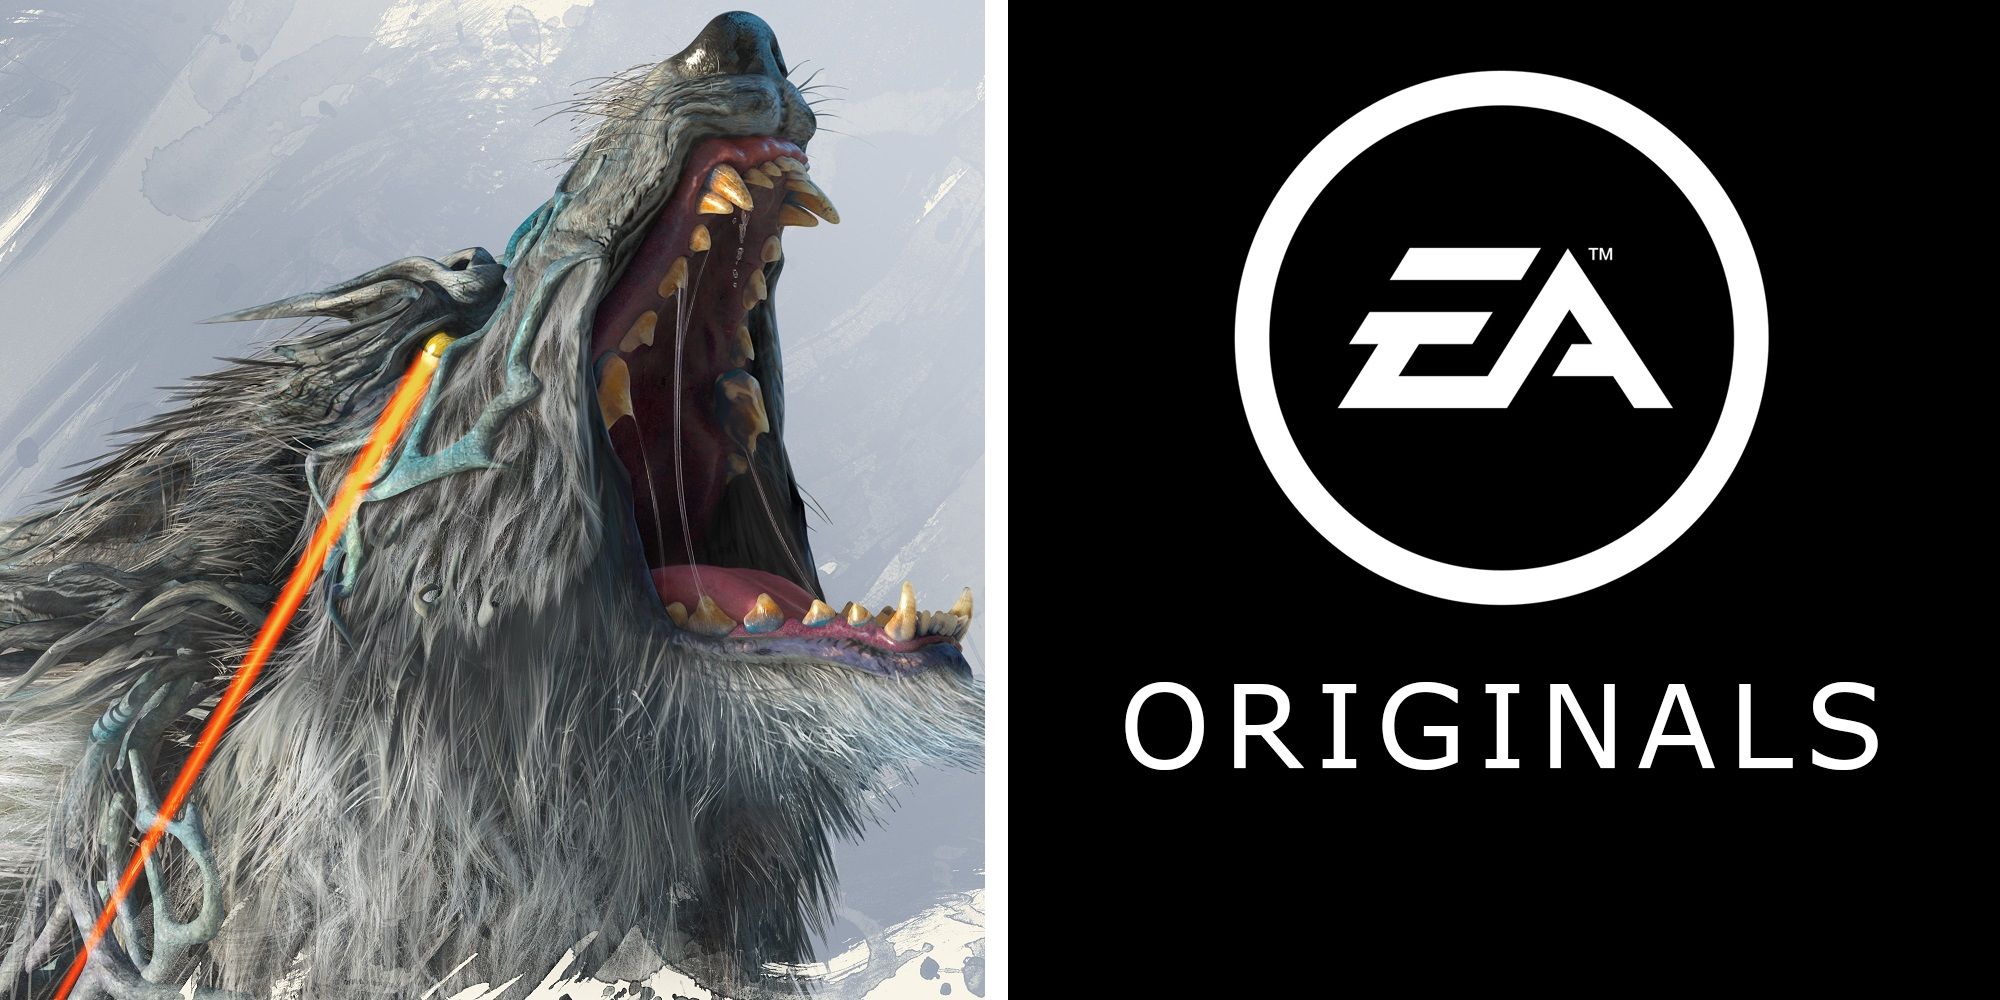 Wild Hearts Wolf Art On The Left, EA Originals Logo On The Right